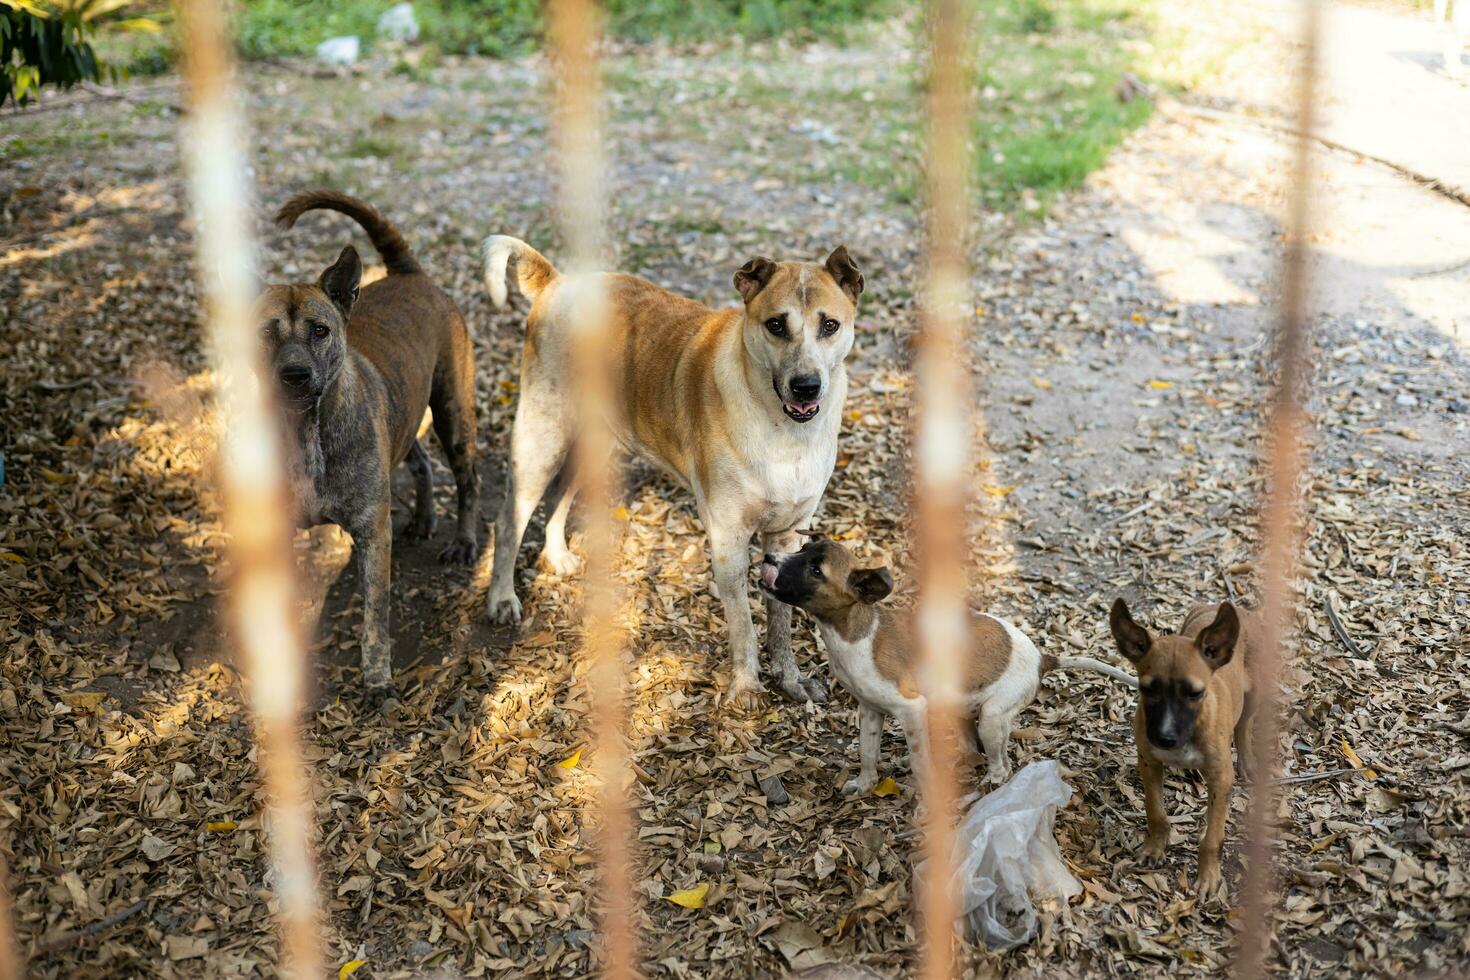 A group of homeless, starving Thai dogs locked in iron fences. photo